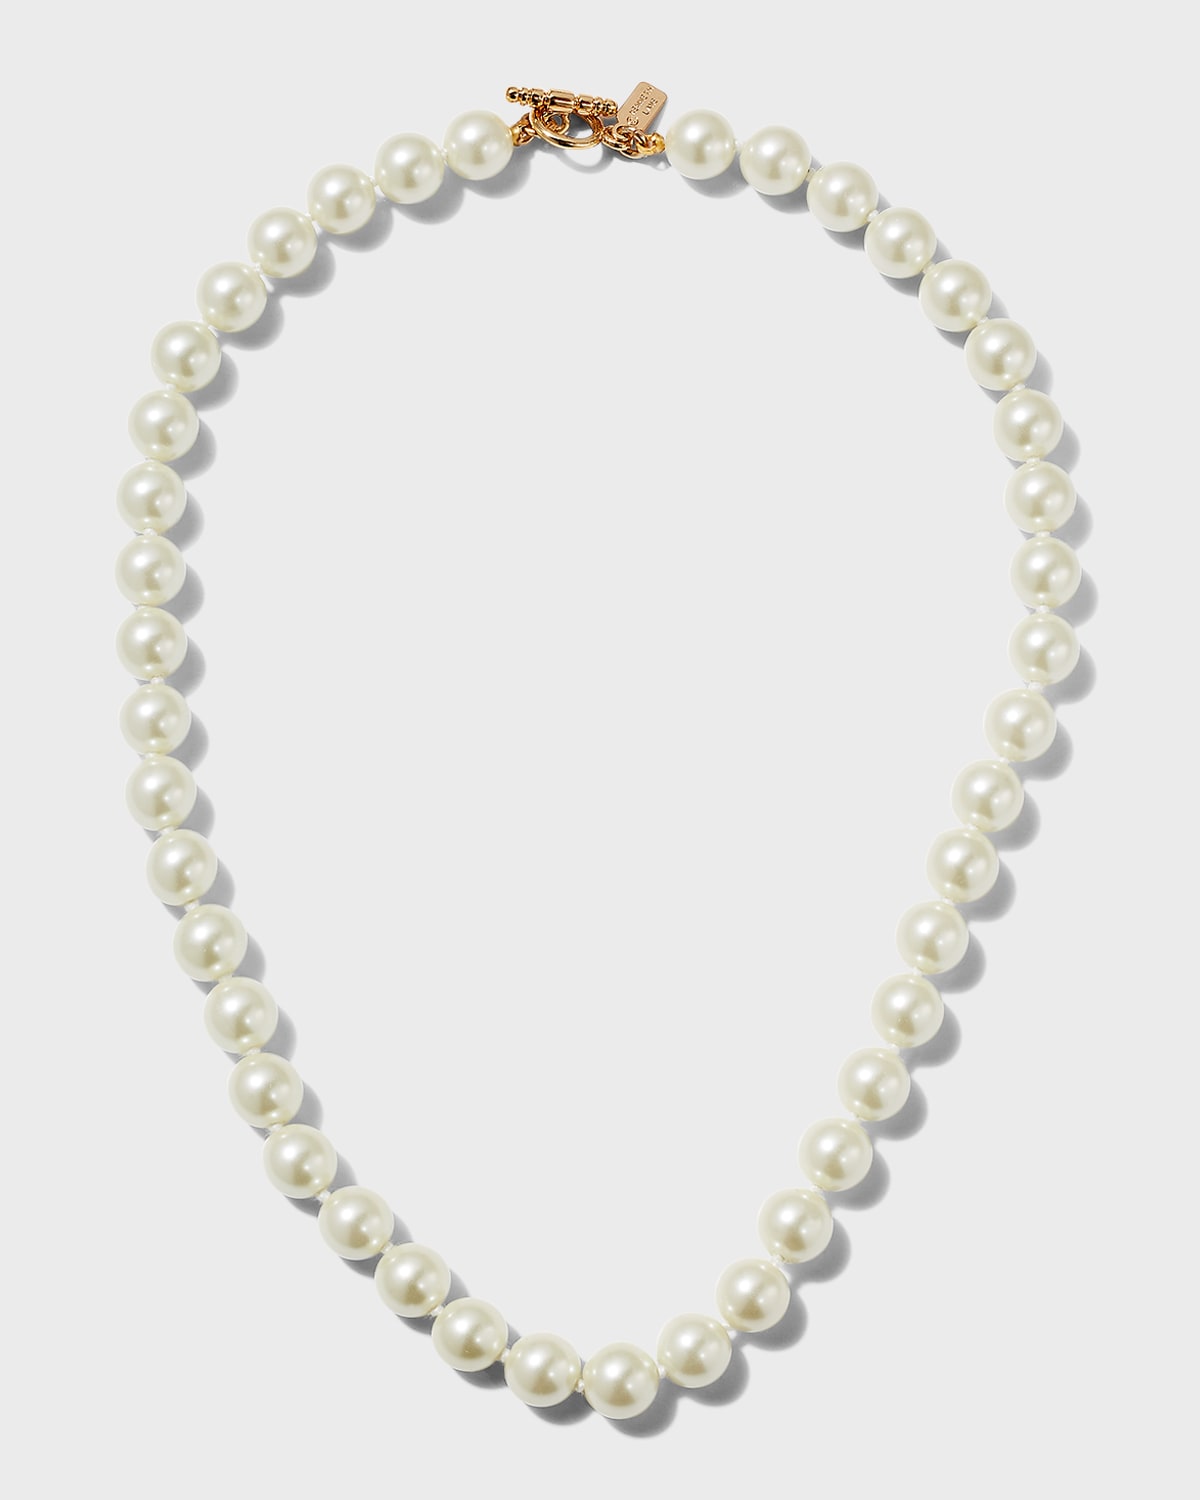 KENNETH JAY LANE LIGHT CULTURA PEARLY STRAND NECKLACE